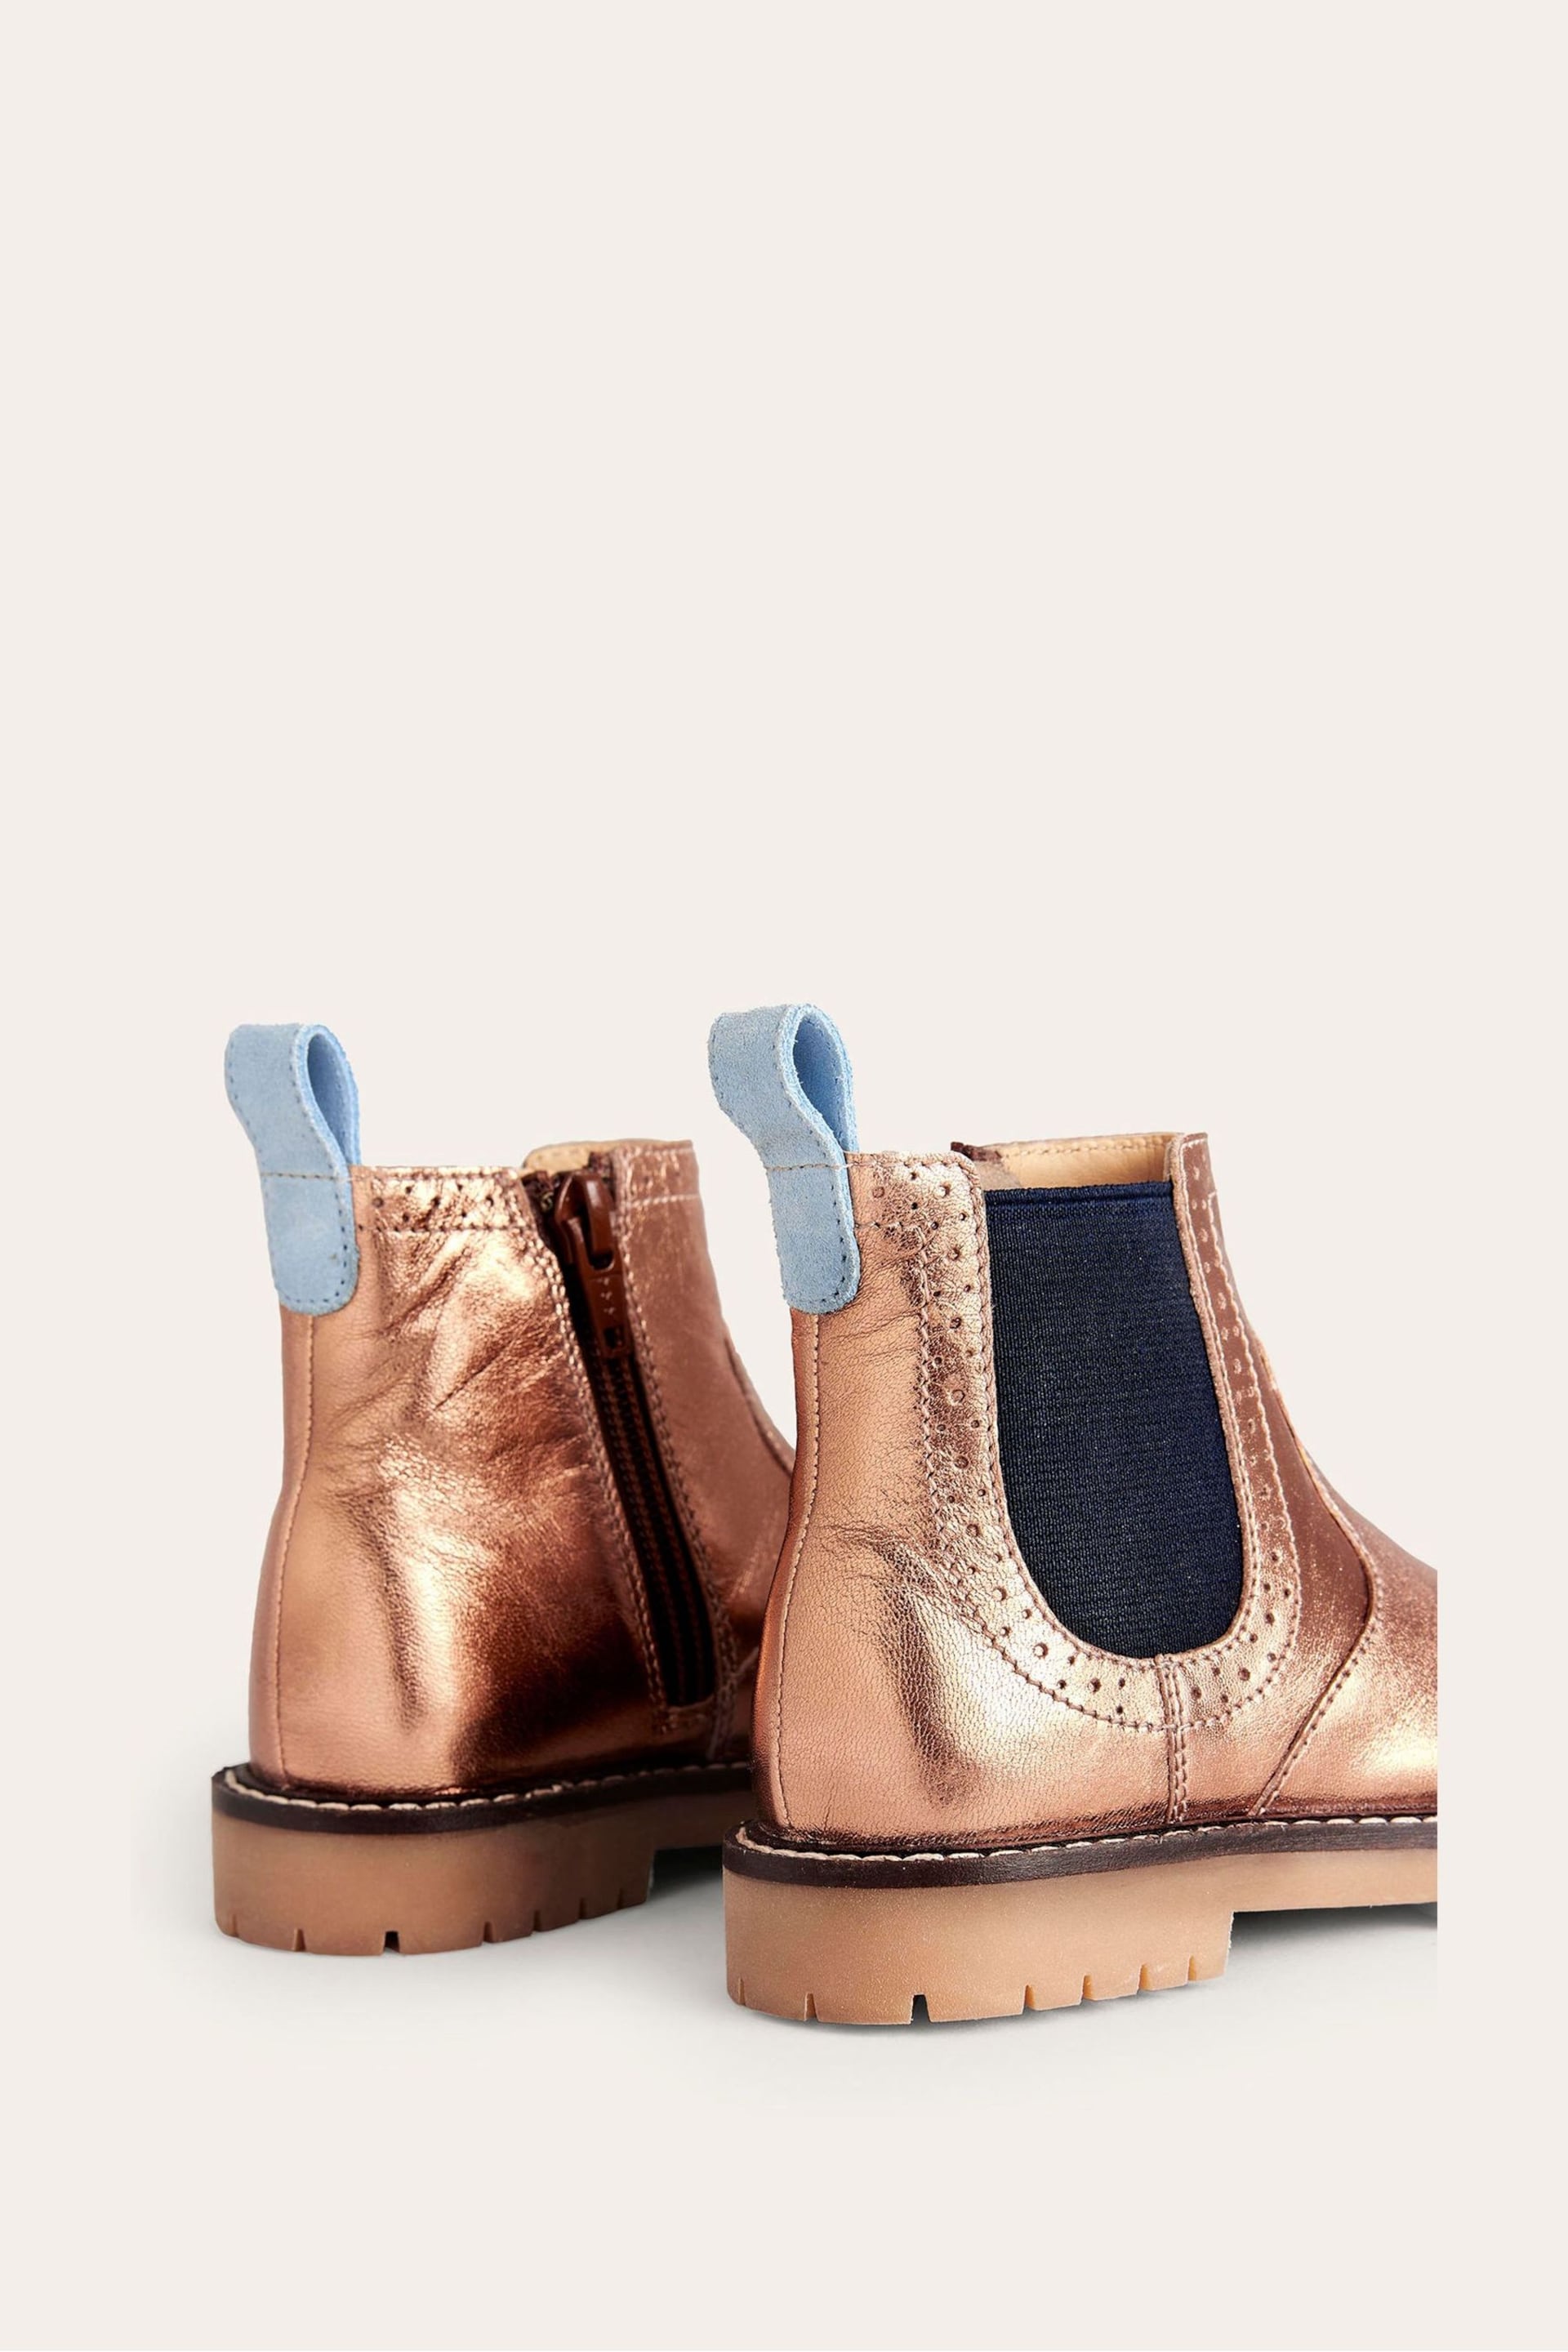 Boden Metallic Leather Chelsea Boots - Image 3 of 4